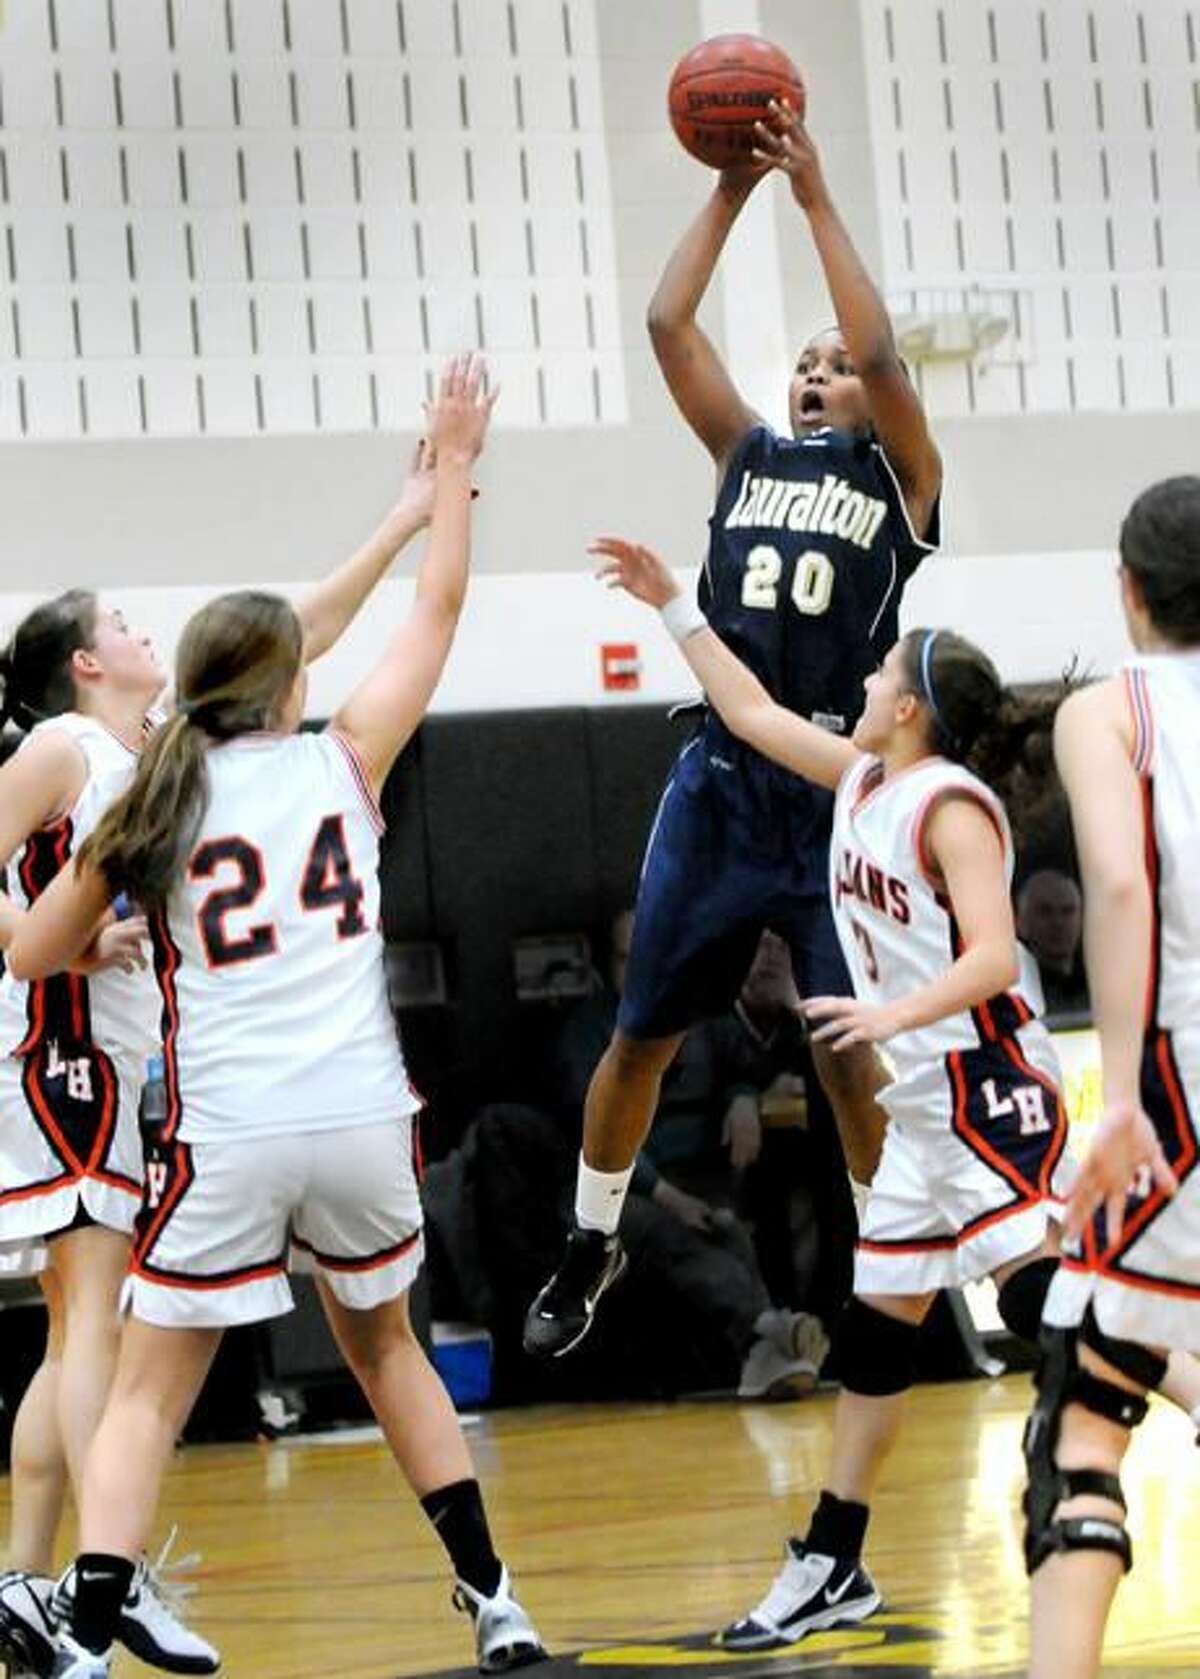 Keylantra Langley shoots over the Lyman Hall defense. Langley scored 27 points in Lauralton Hall's 65-42 victory in the Hand Holiday Tournament championship game. (Photo by Melanie Stengel/ New Haven Register)